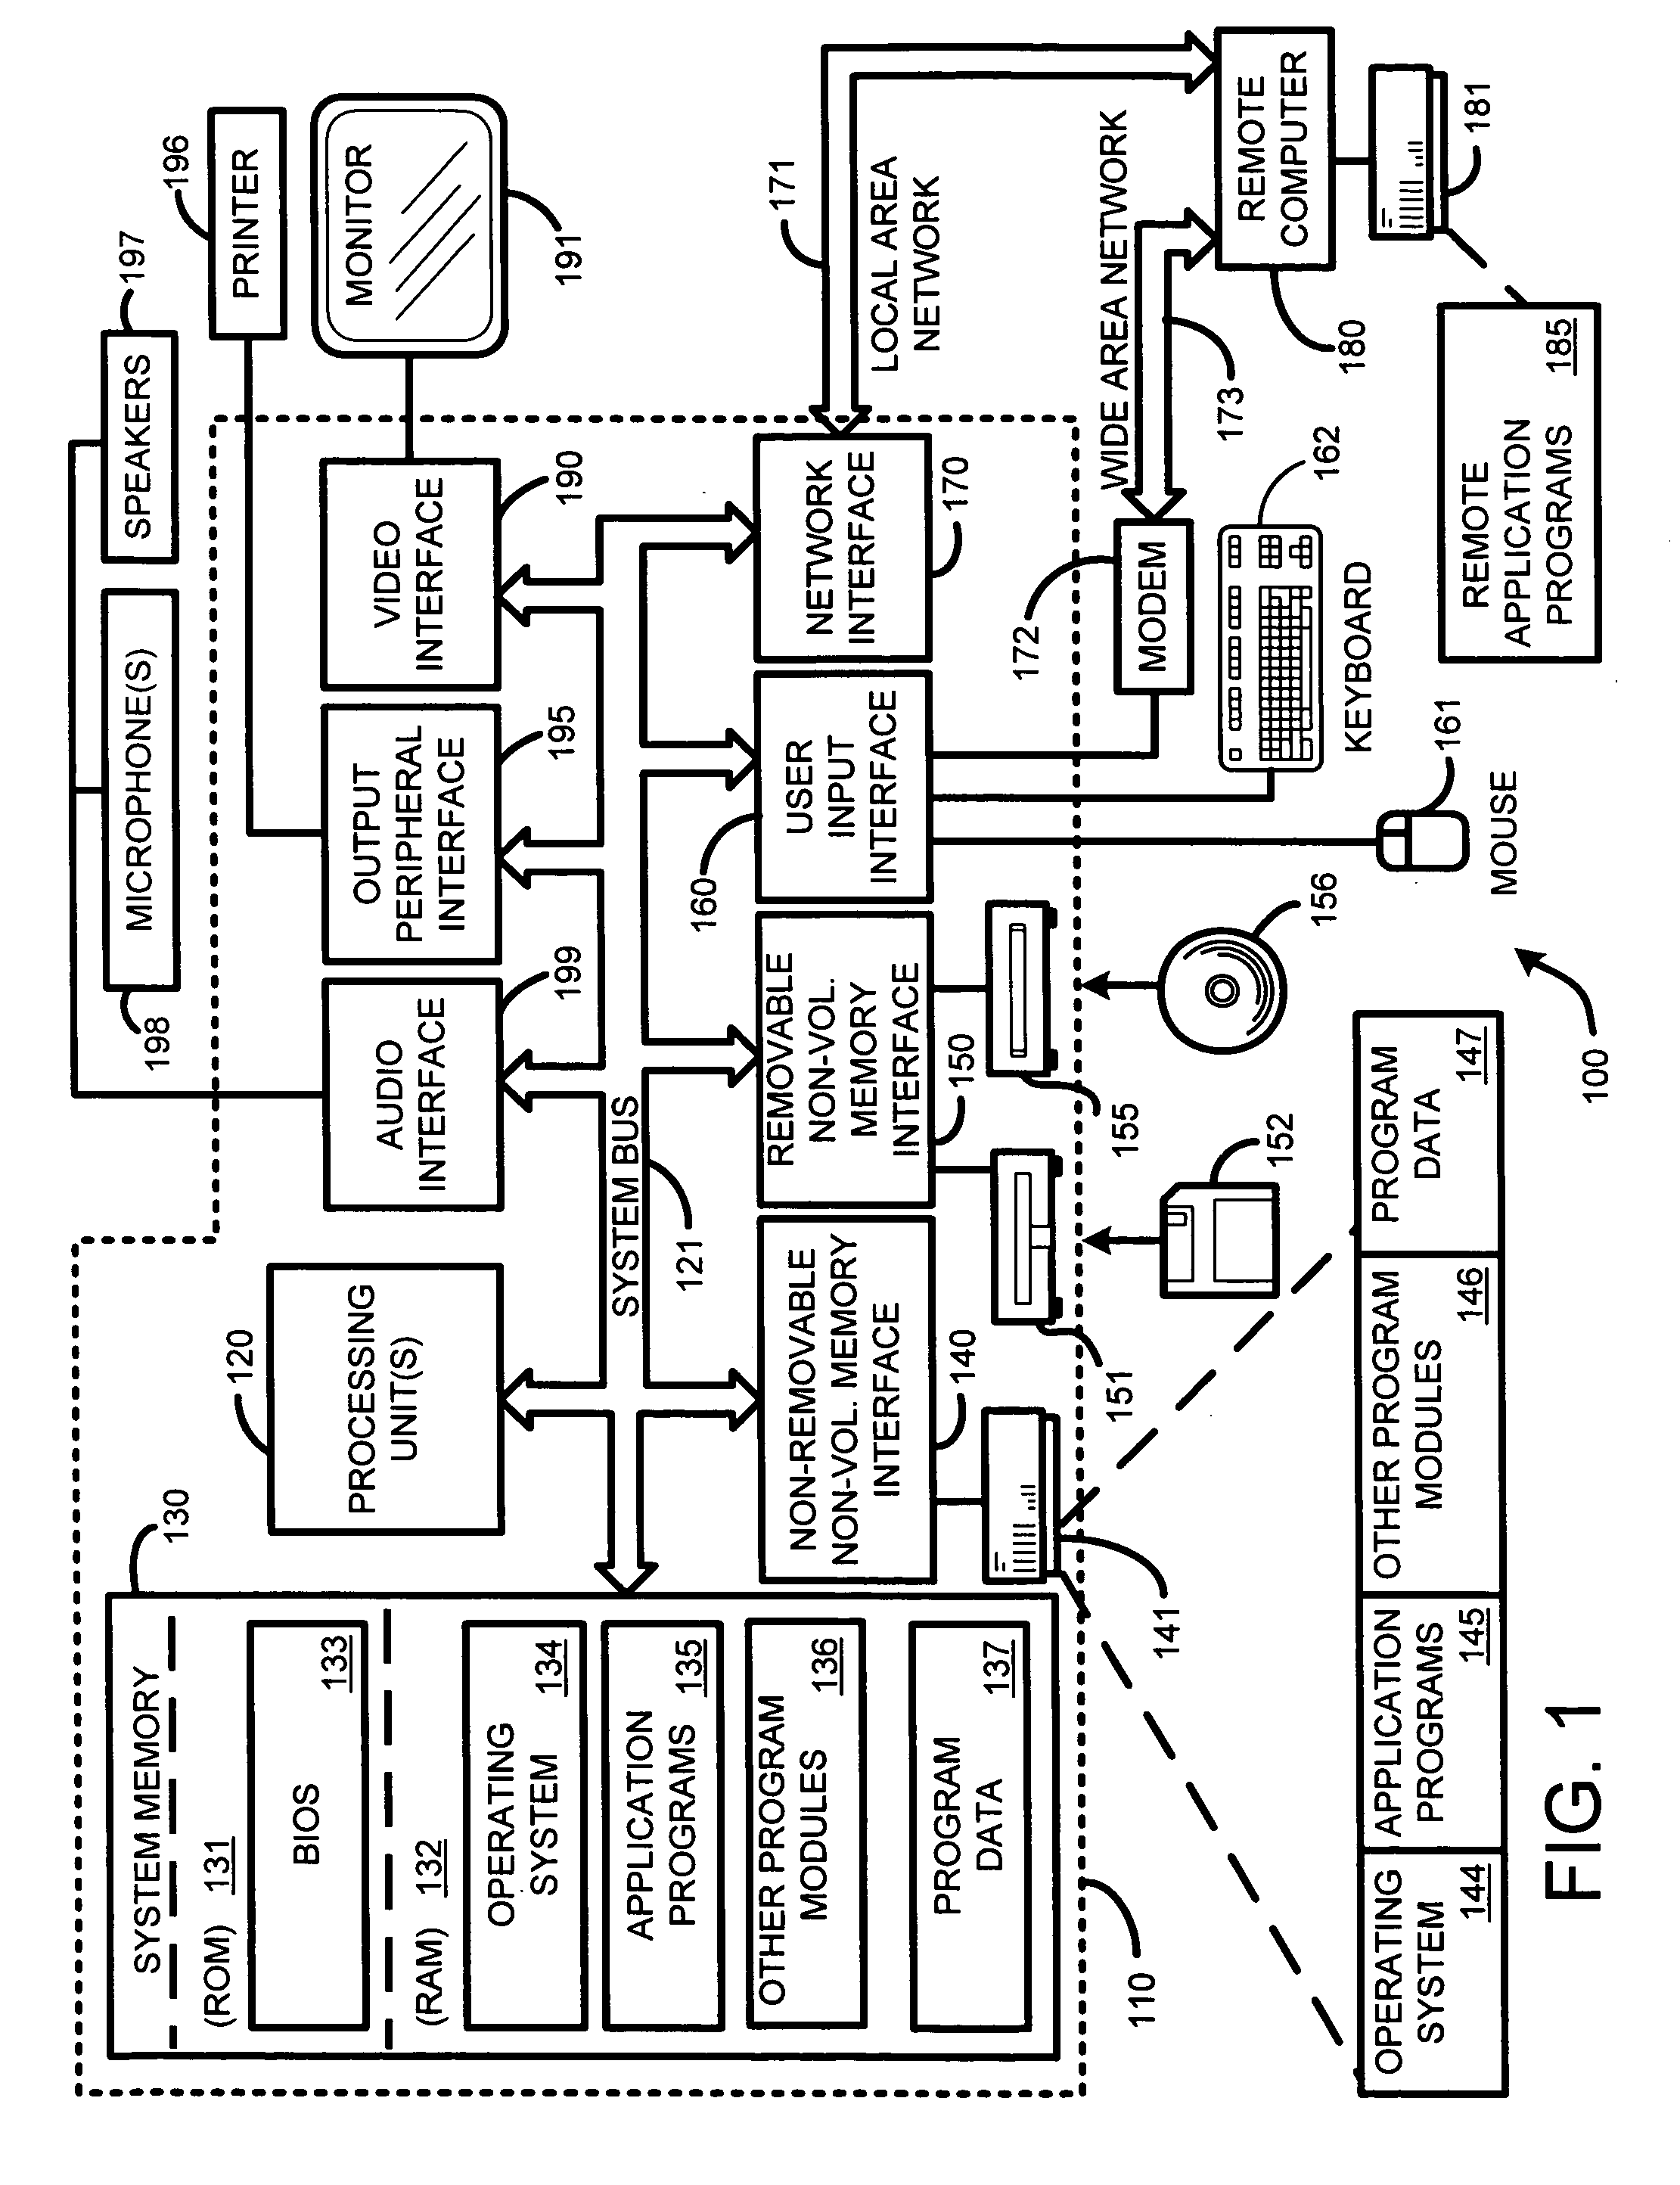 System and method for speeding up database lookups for multiple synchronized data streams